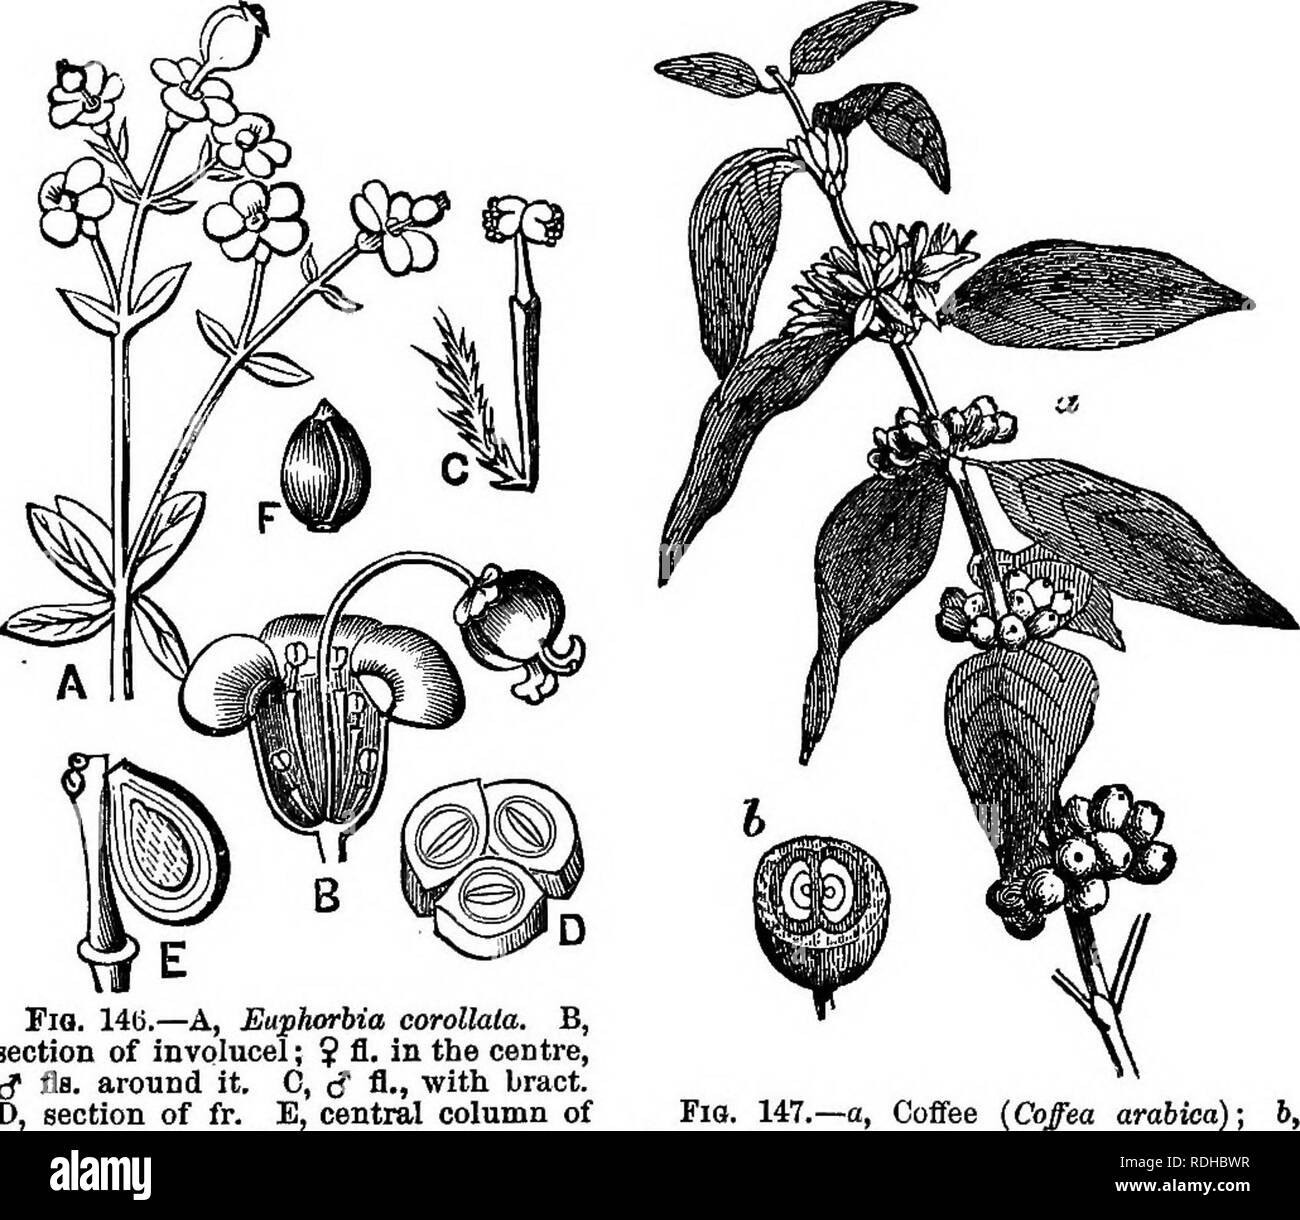 . Botany for academies and colleges: consisting of plant development and structure from seaweed to clematis. Botany; 1889. Fig. 145.— Wnghtia tinctoria. and Privet, or whorled, as in the Oleander, the cyme may become a. Fig. 14ti.—A, Euphorbia coroUata. B, section of involucel; $ fl. in the centre, tf flfl. around it. 0, c? fl.» with bract. D, section of fr. E, centiul column of pistil, with 1 nut divided. F, ad. Fia. 147.—a, Coffee (Coffea ambica); berry, trans, sec. Compound Cyme (Wrightia, Oleander, Elder), or a Cymose Panicle. Please note that these images are extracted from scanned page i Stock Photo